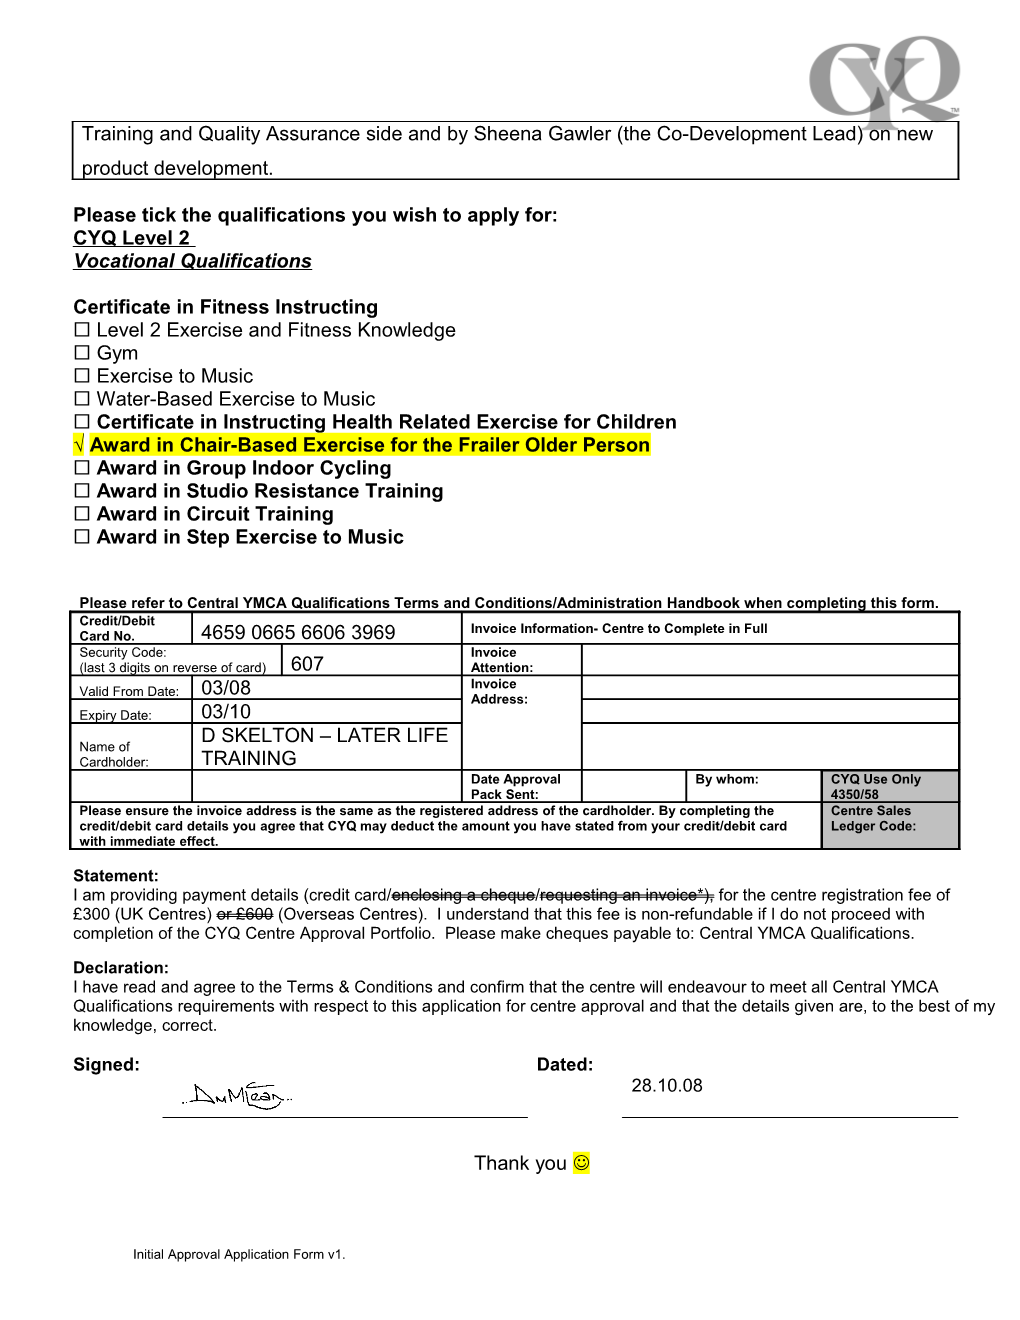 Initial Centre Approval Application Form